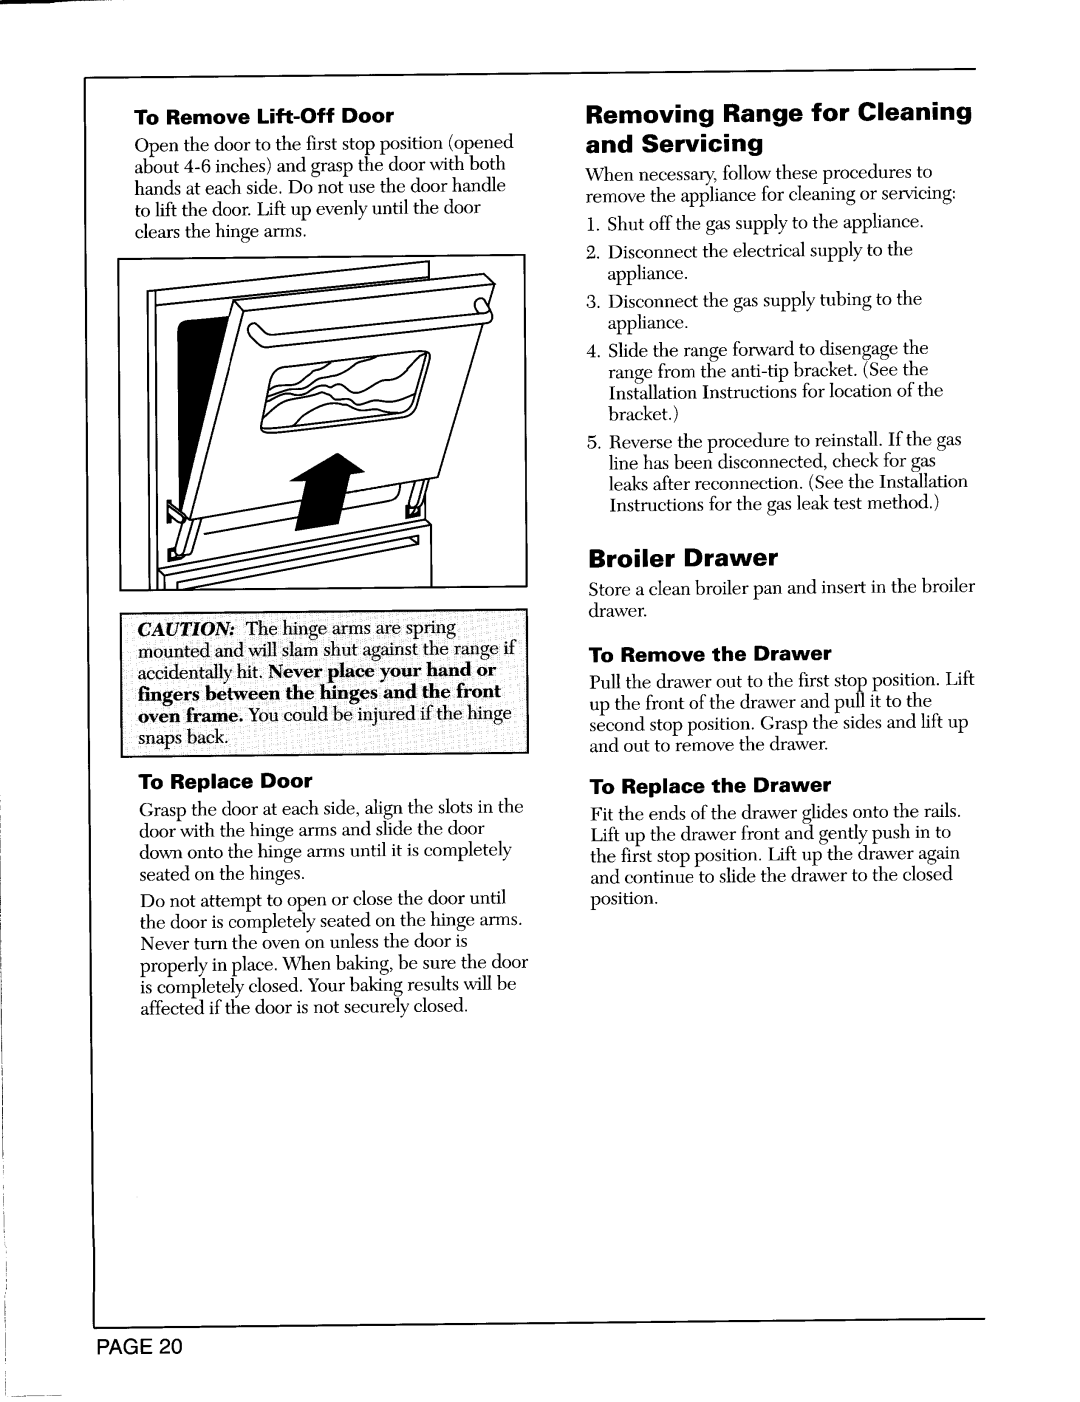 Maytag CRG7500A, CRG7400B, CRG8200B warranty Removing Range for Cleaning, and Servicing, Broiler Drawer, Page 